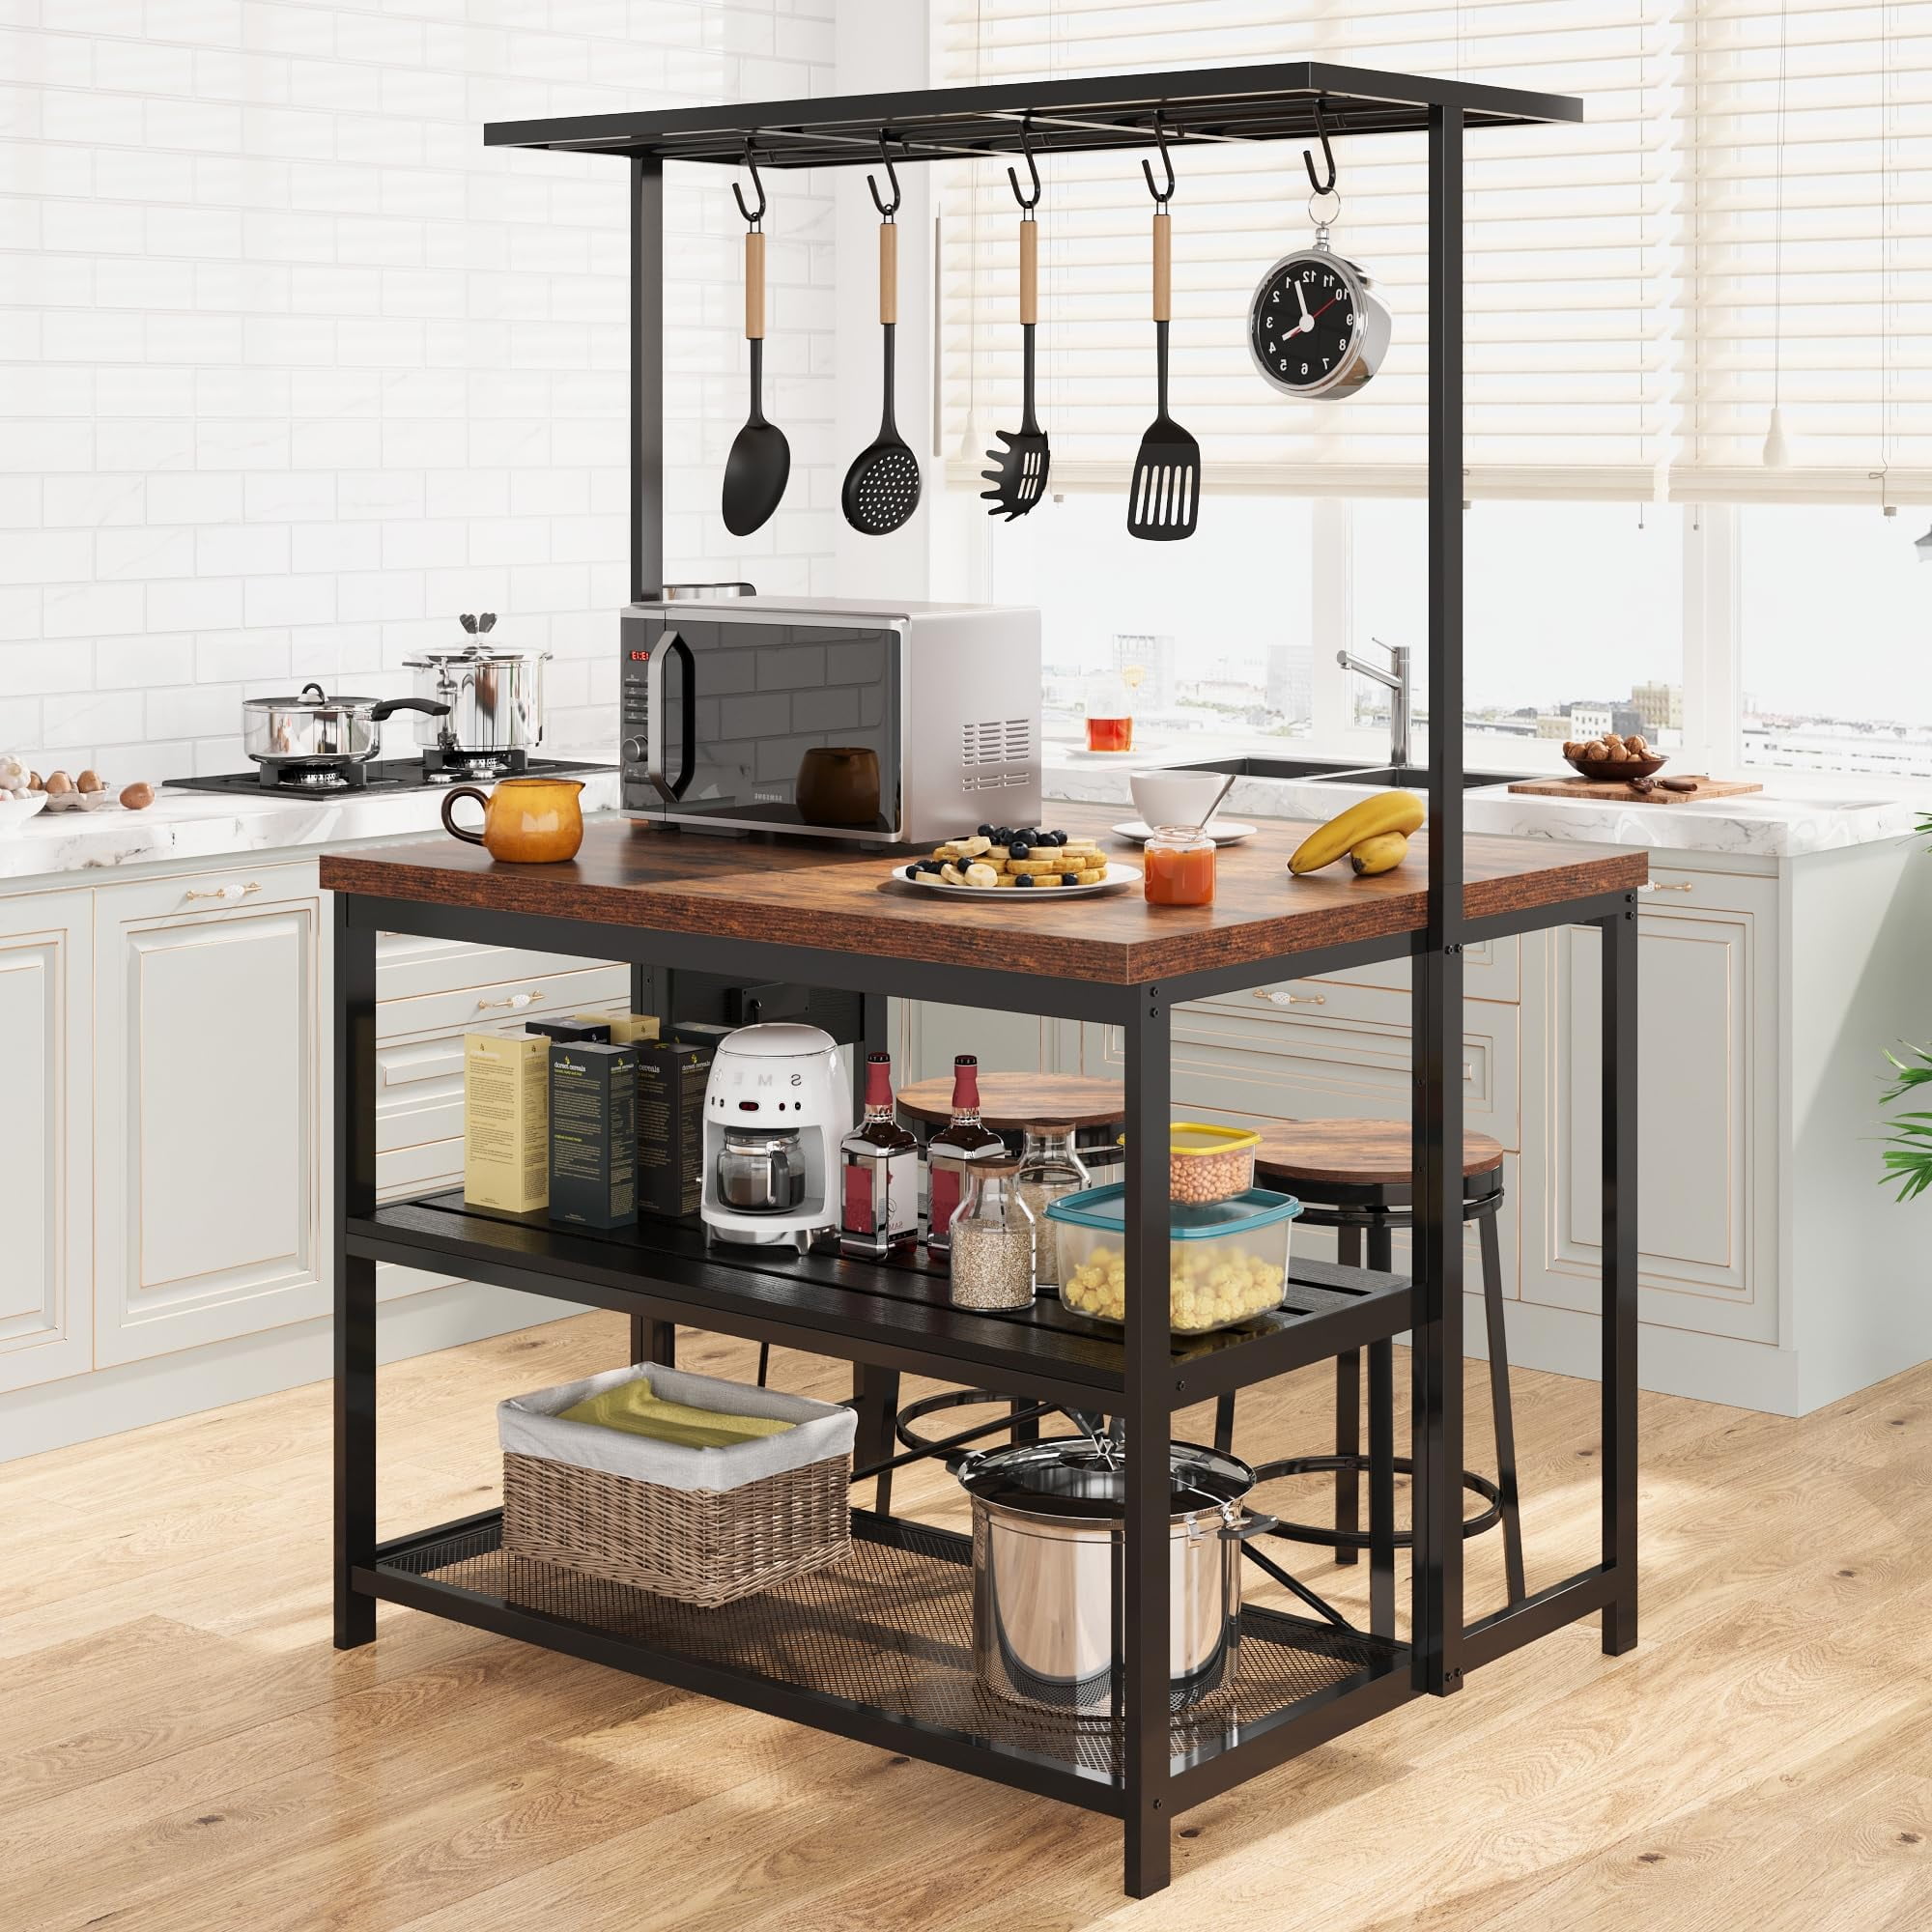 Litake Kitchen Island with Storage, Bakers Rack with Power Outlet ...